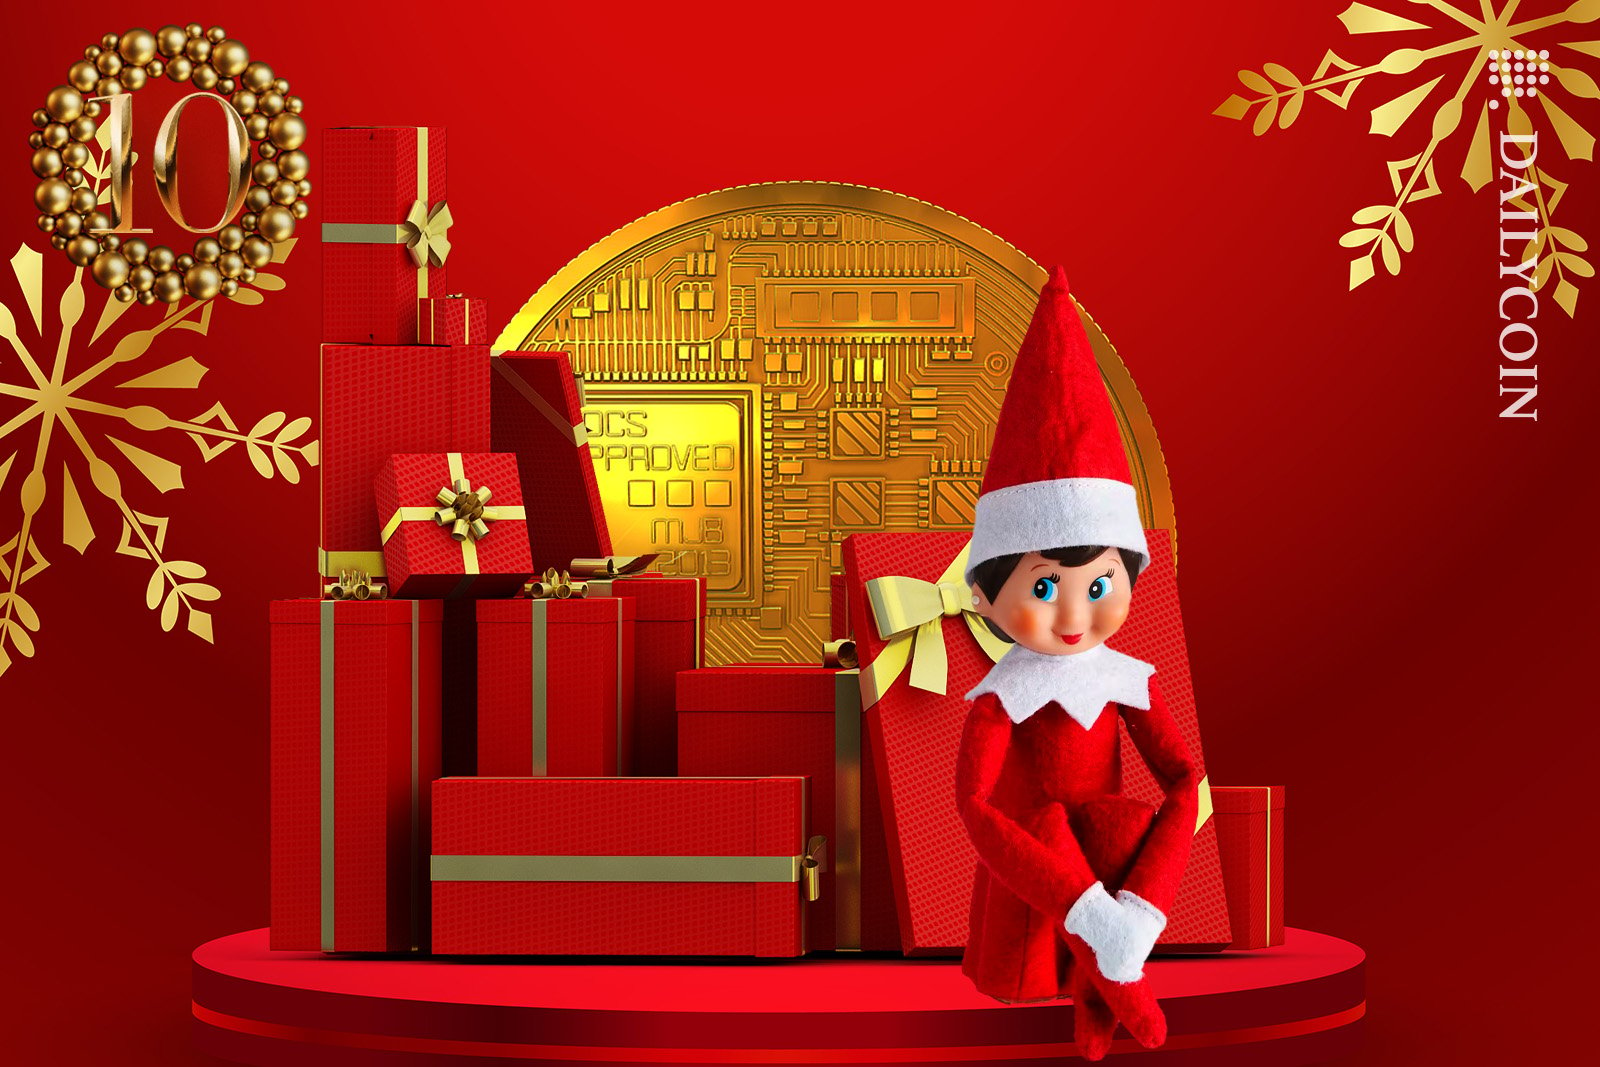 Elf on the shelf going through the wrapped up crypto coins.